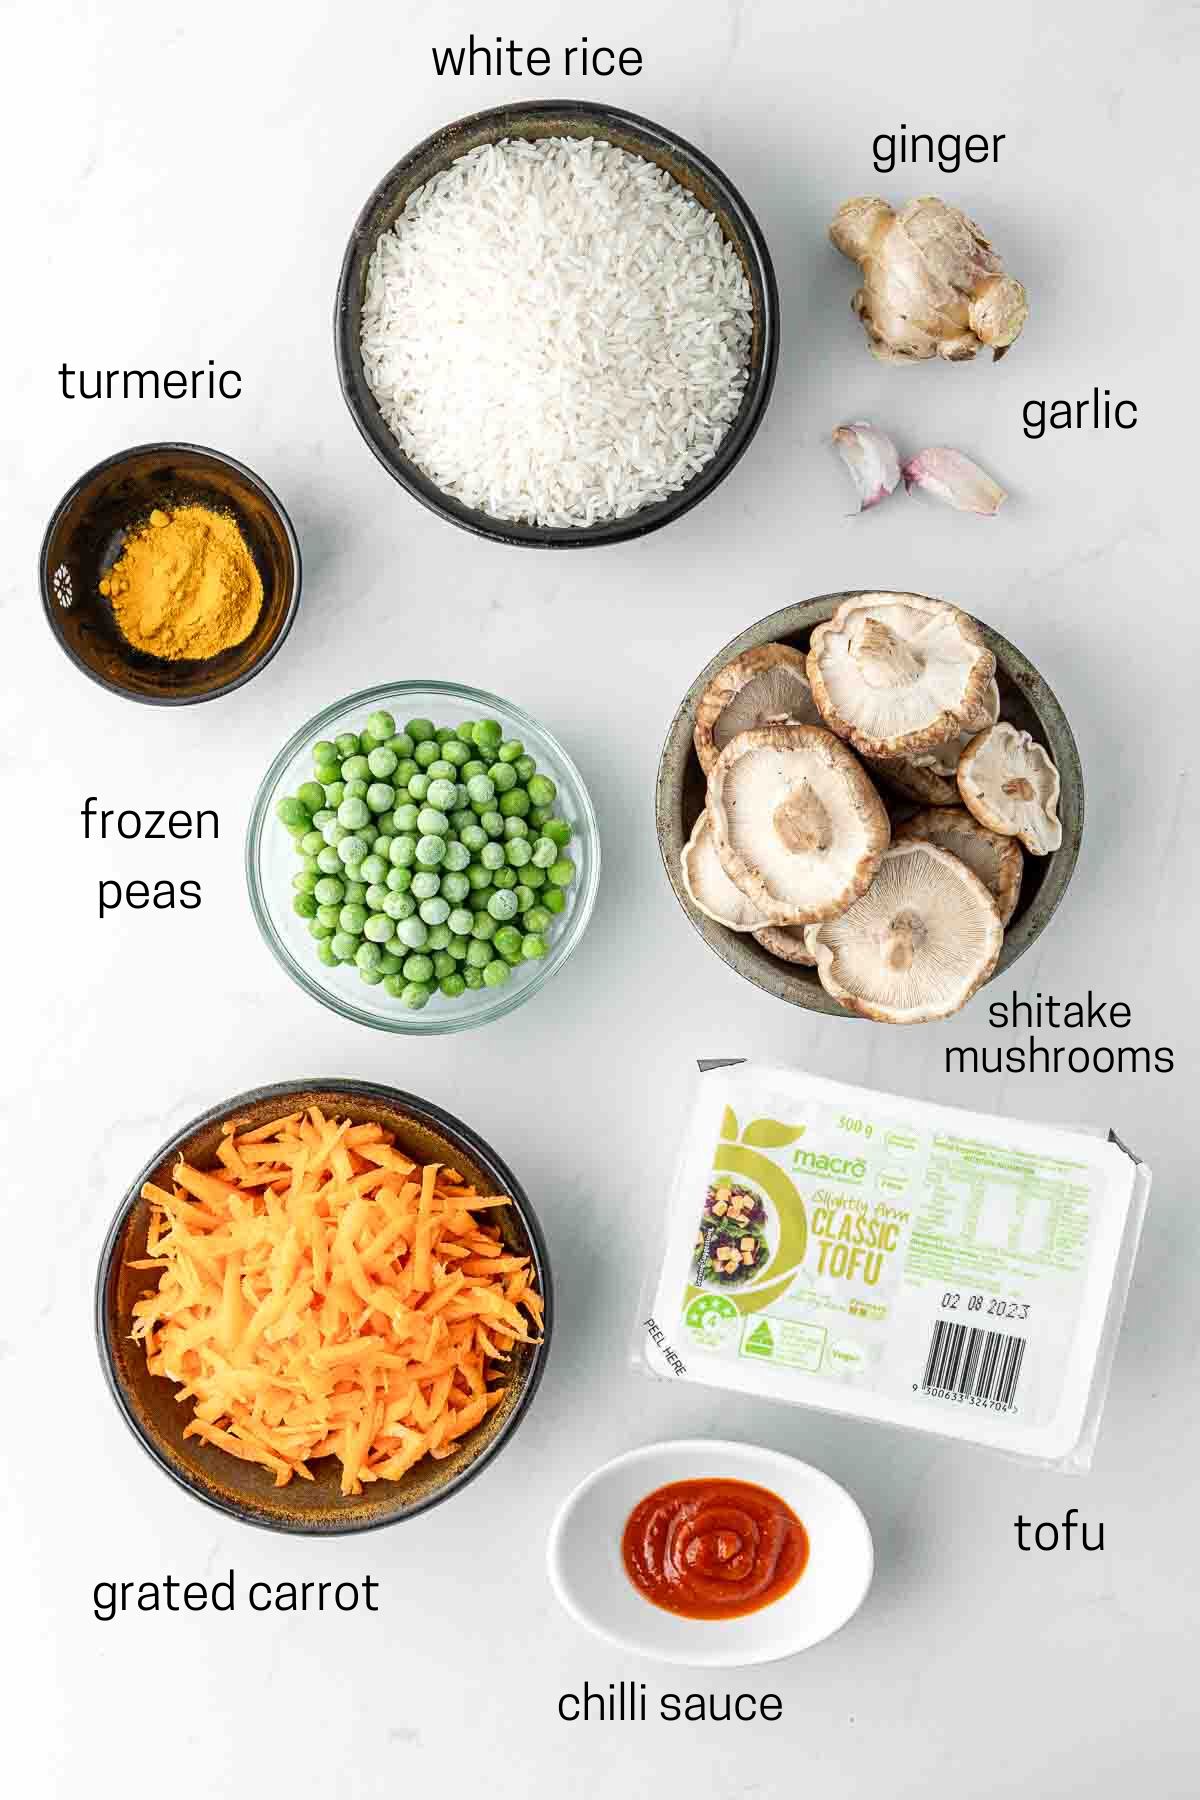 All ingredients needed to make turmeric fried rice laid out in bowls.